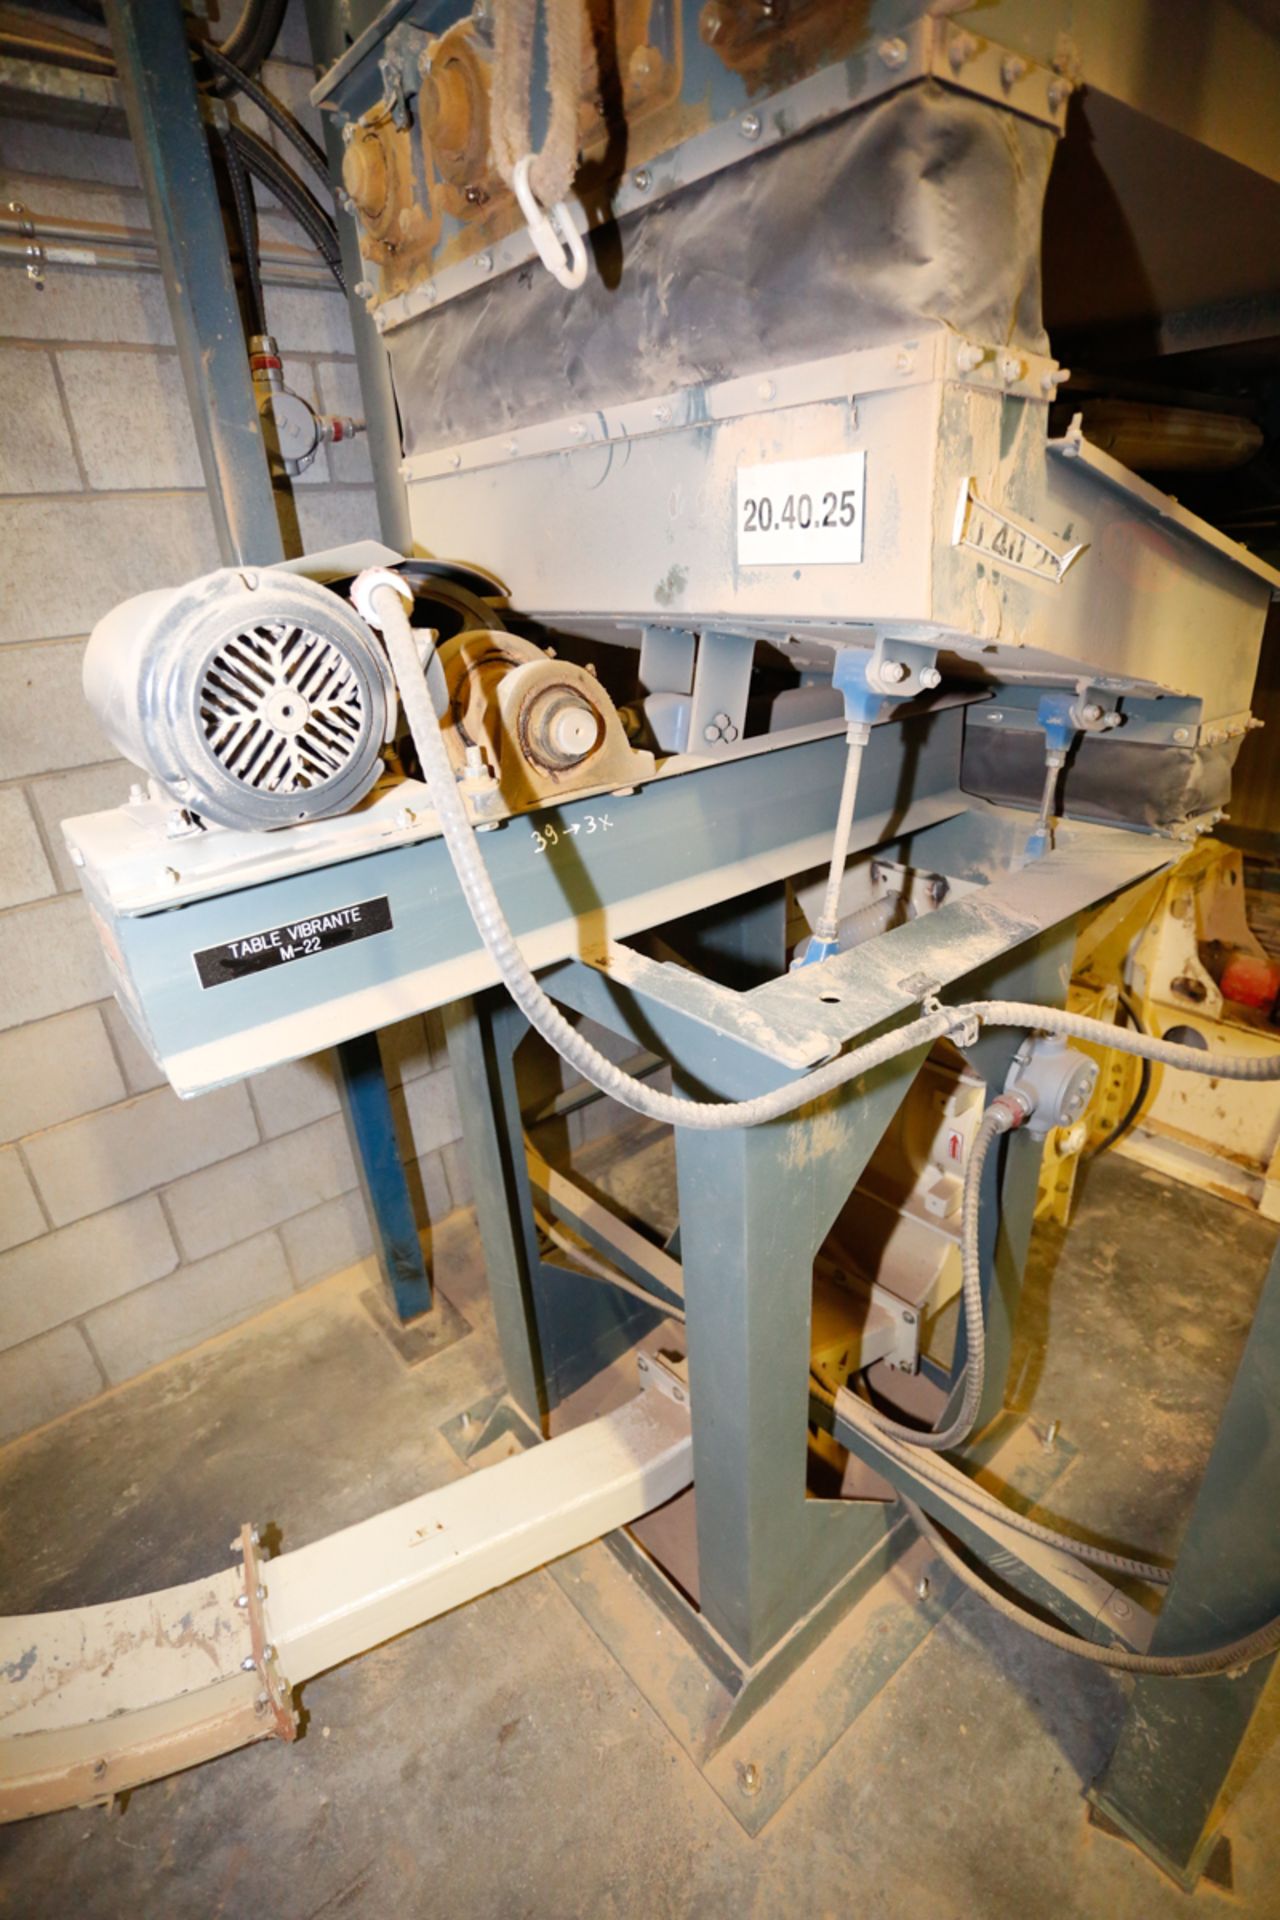 RDL DUST COLLECTOR W/ VIBRATORY SCREEN & HAMMER MILL (ITEM # 20.40.25) - Image 3 of 5